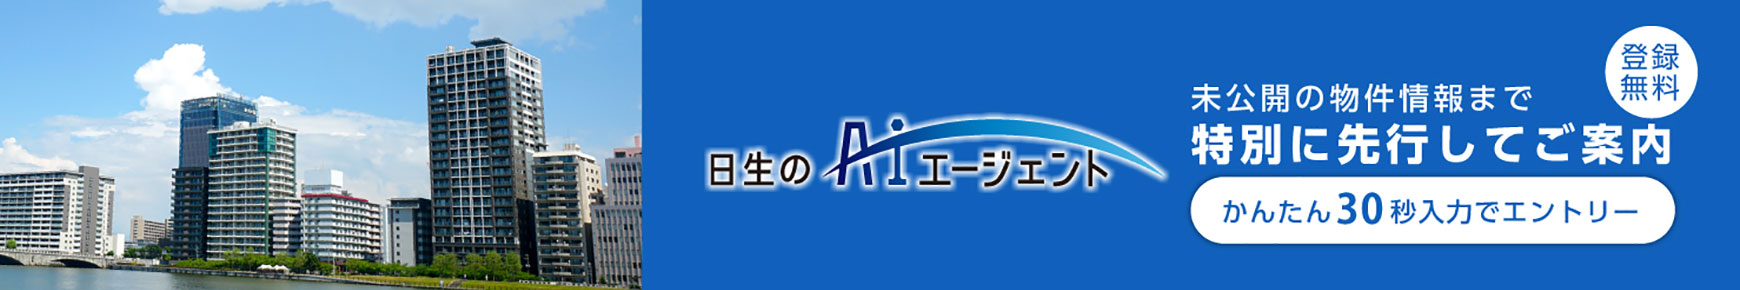 AIエージェント